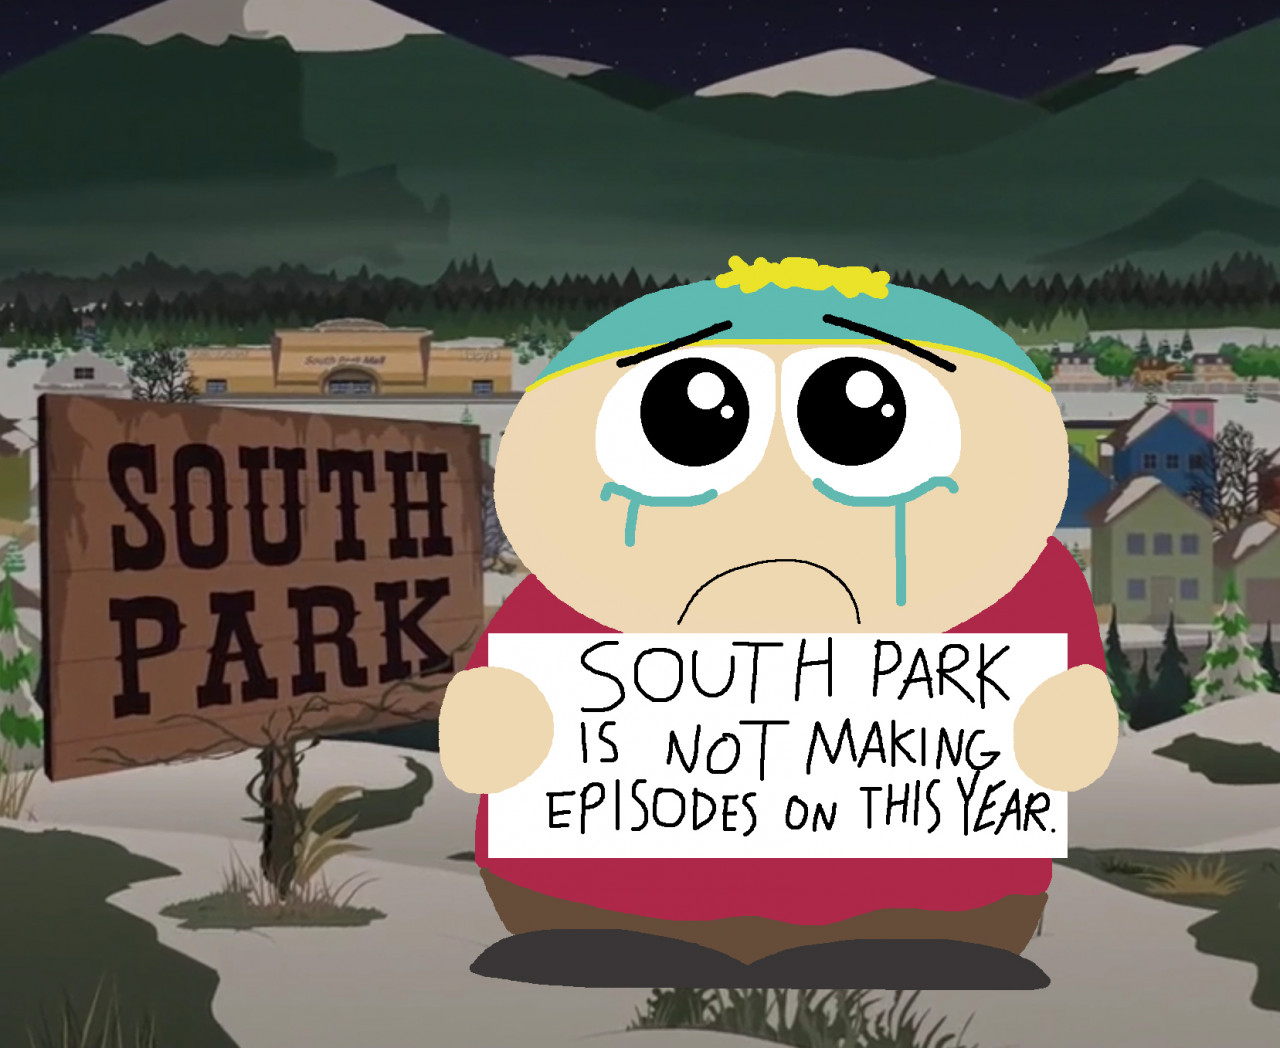 New Episode Preview: Not Happening on My Watch - SOUTH PARK 